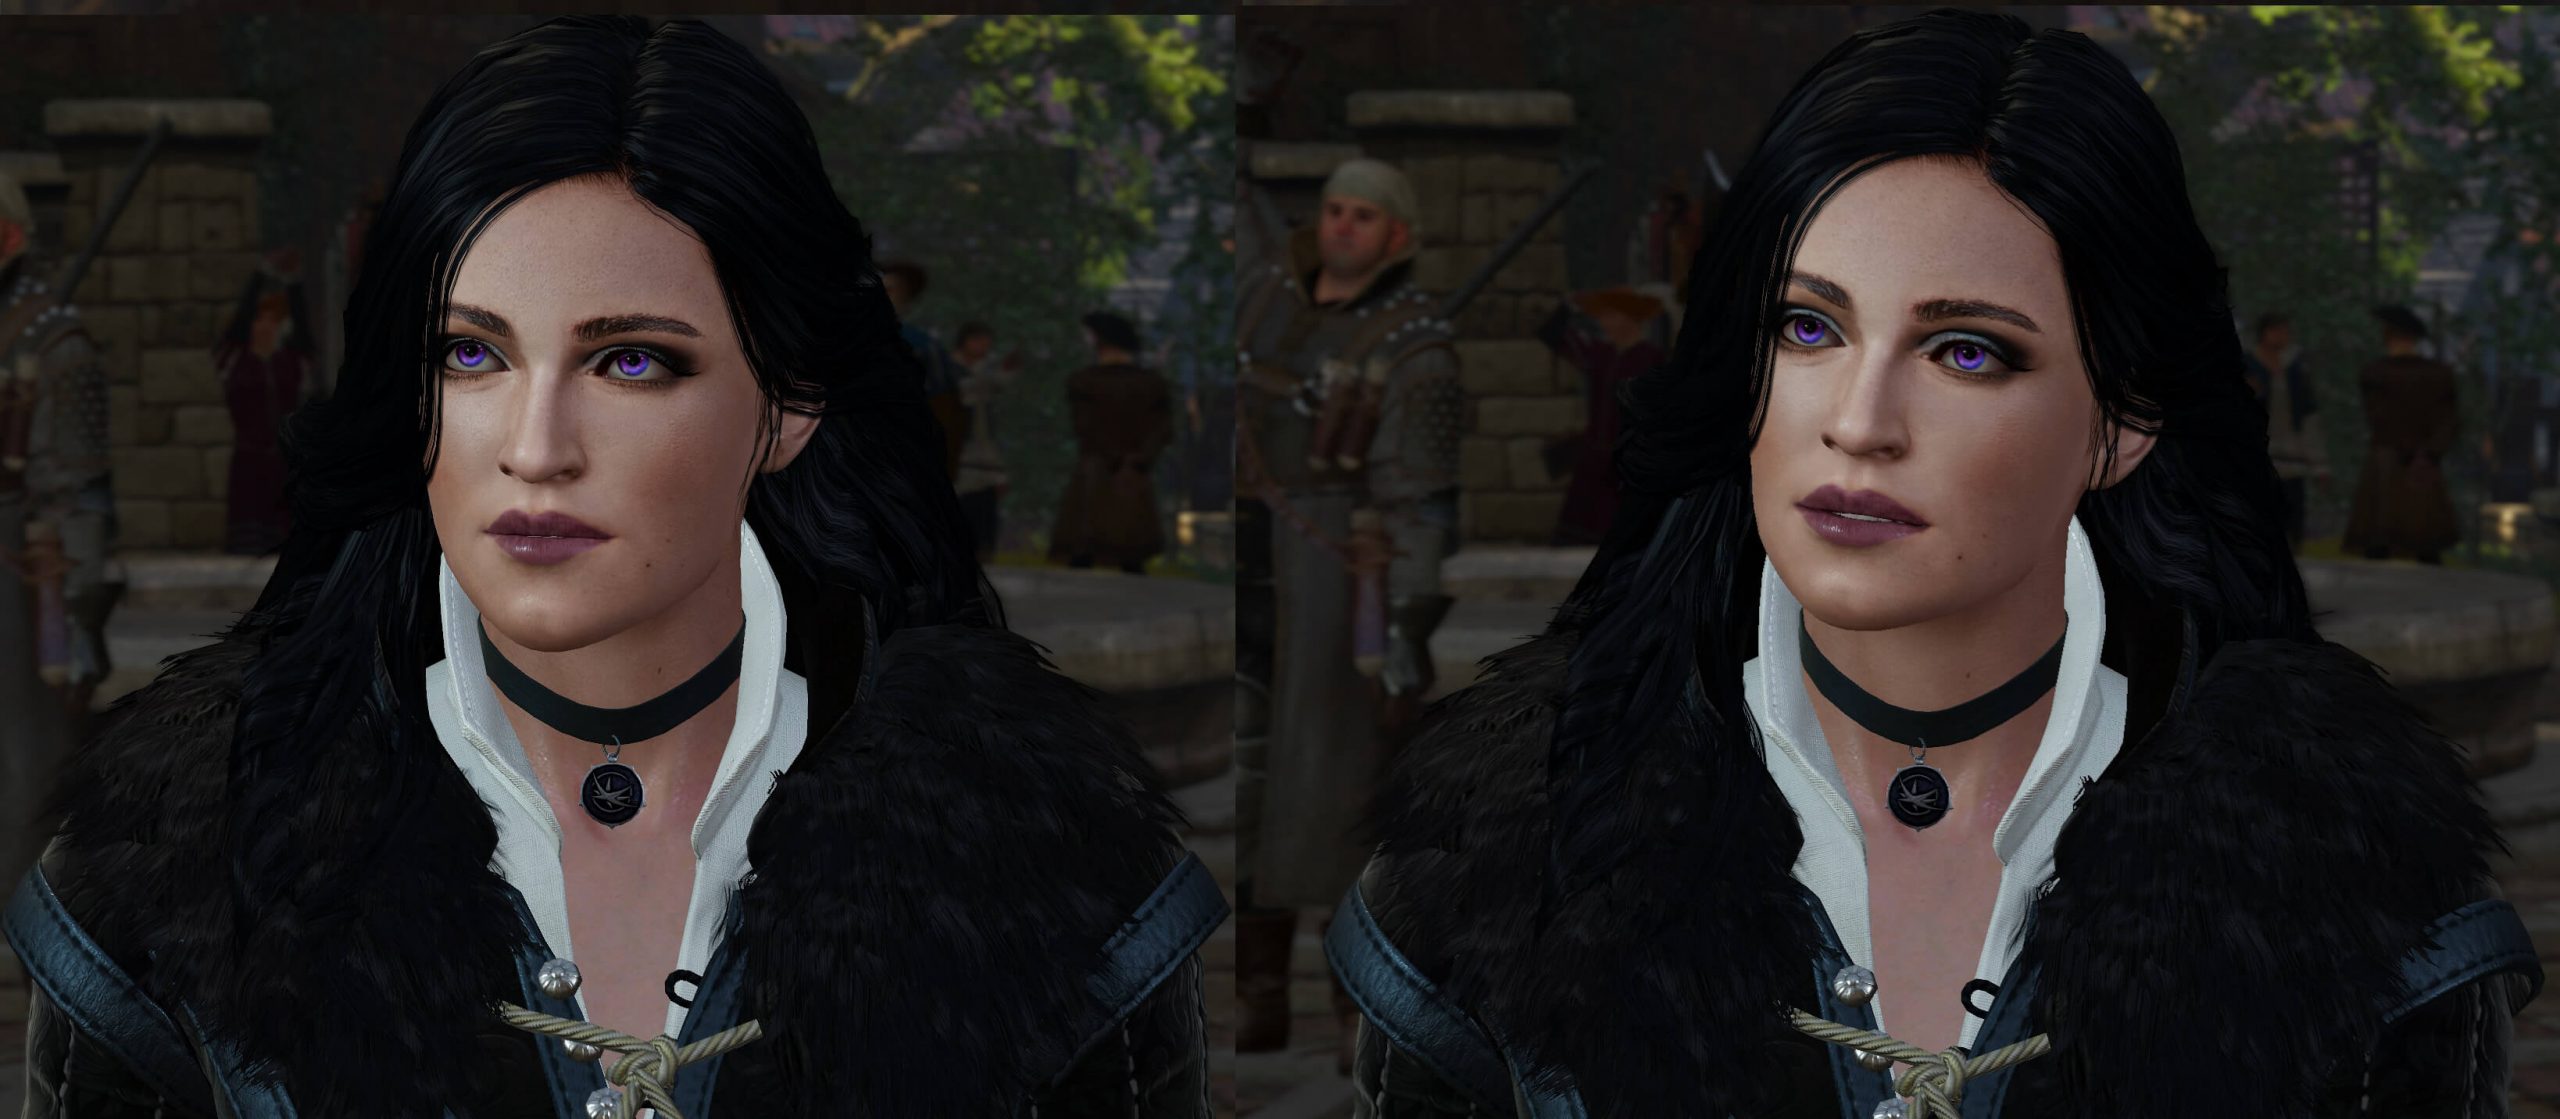 Yennefer of vengerberg the witcher 3 voiced standalone follower фото 66